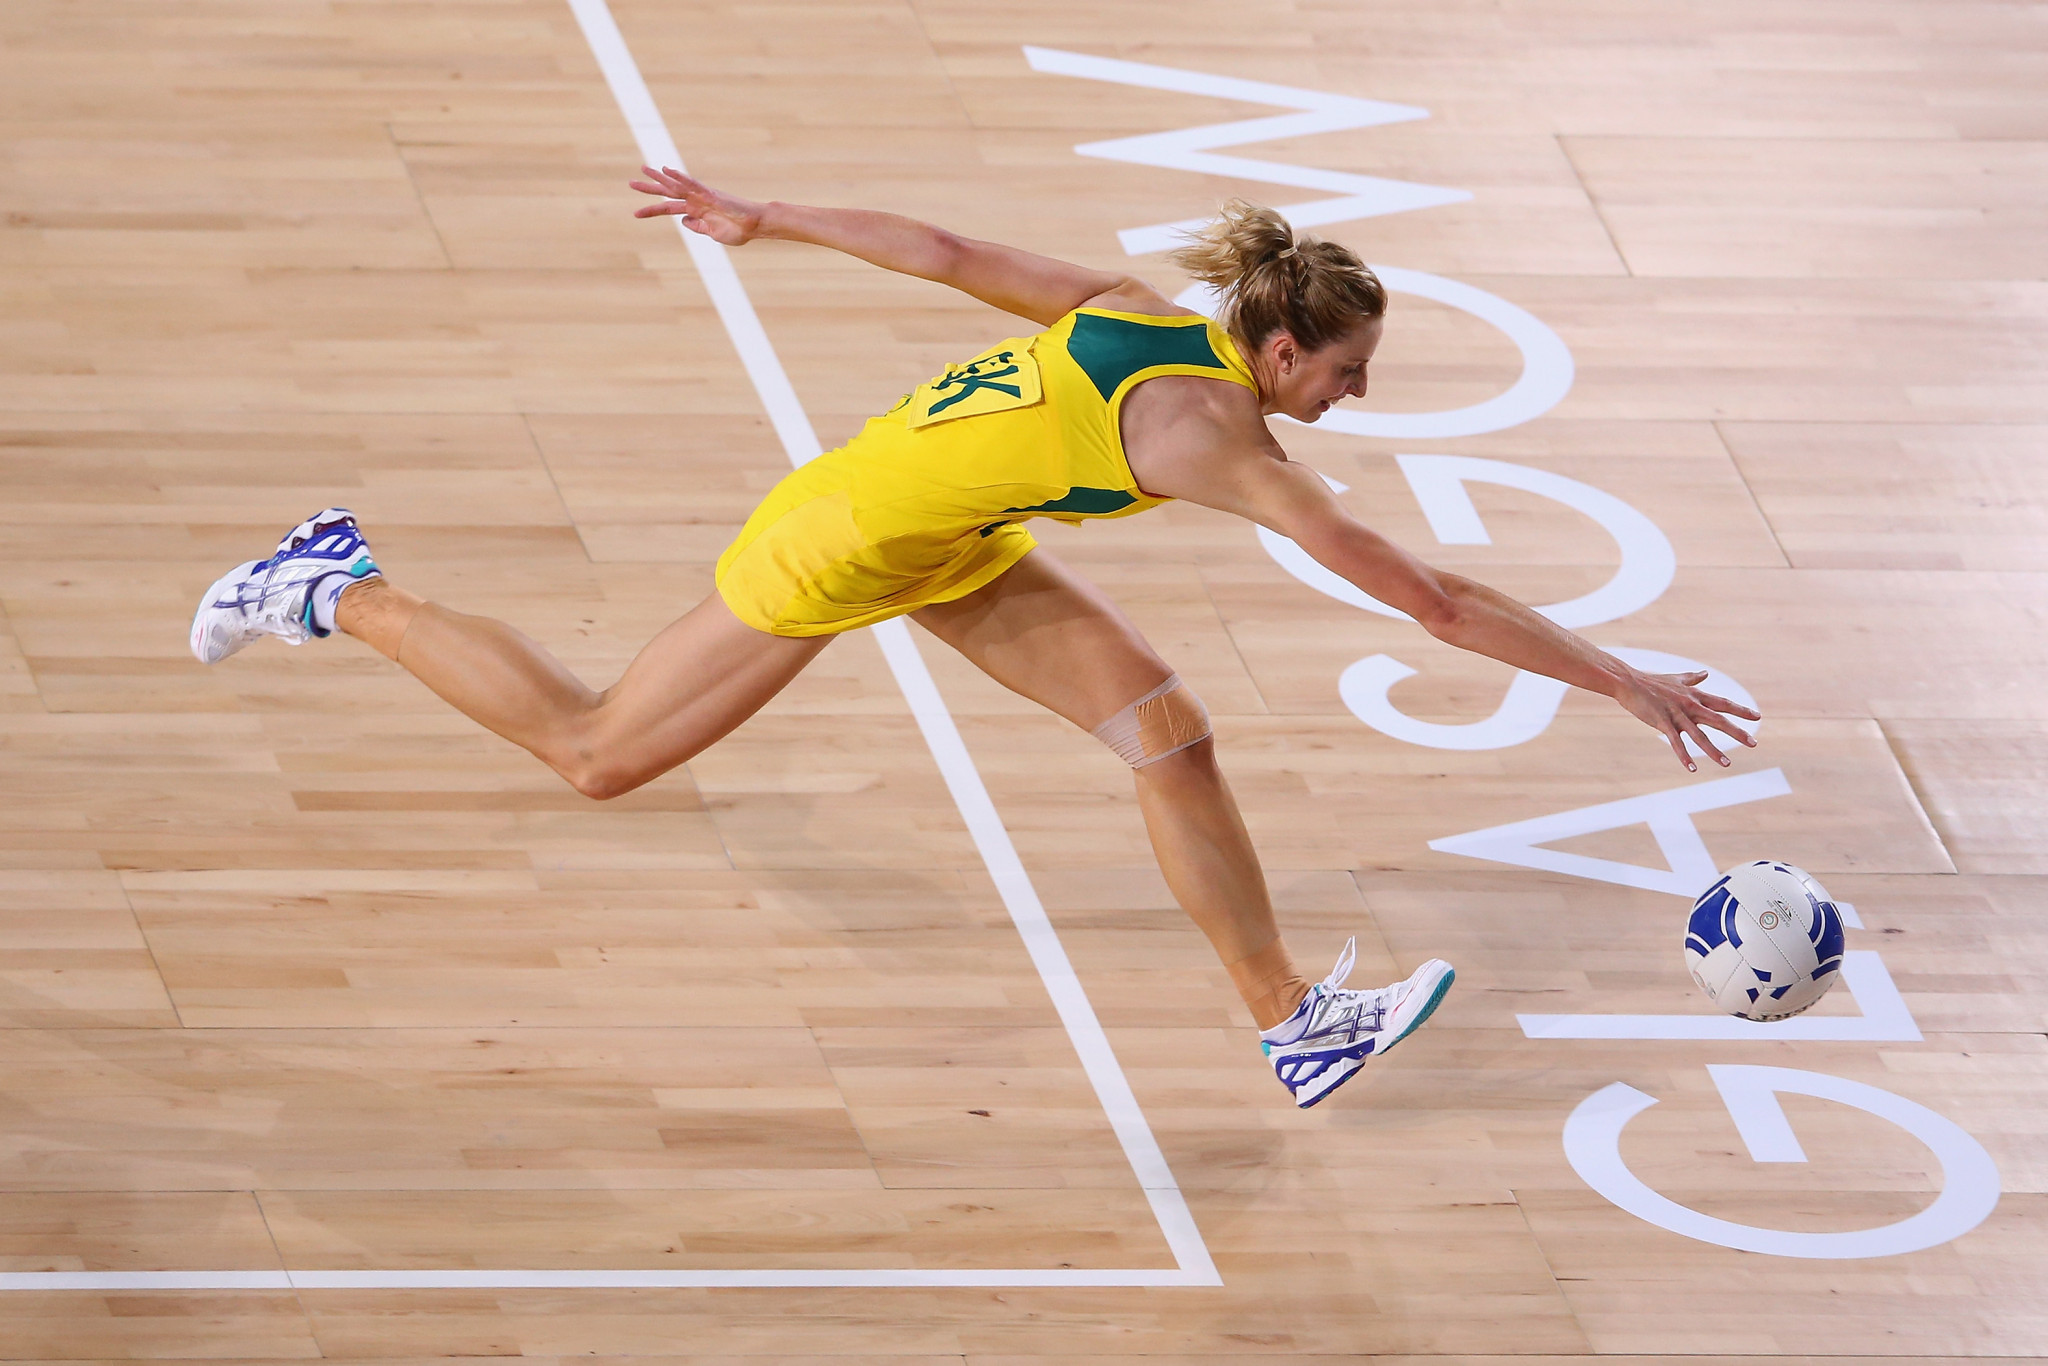 Laura Geitz returns to the Australian netball fold after two seasons away ©Getty Images